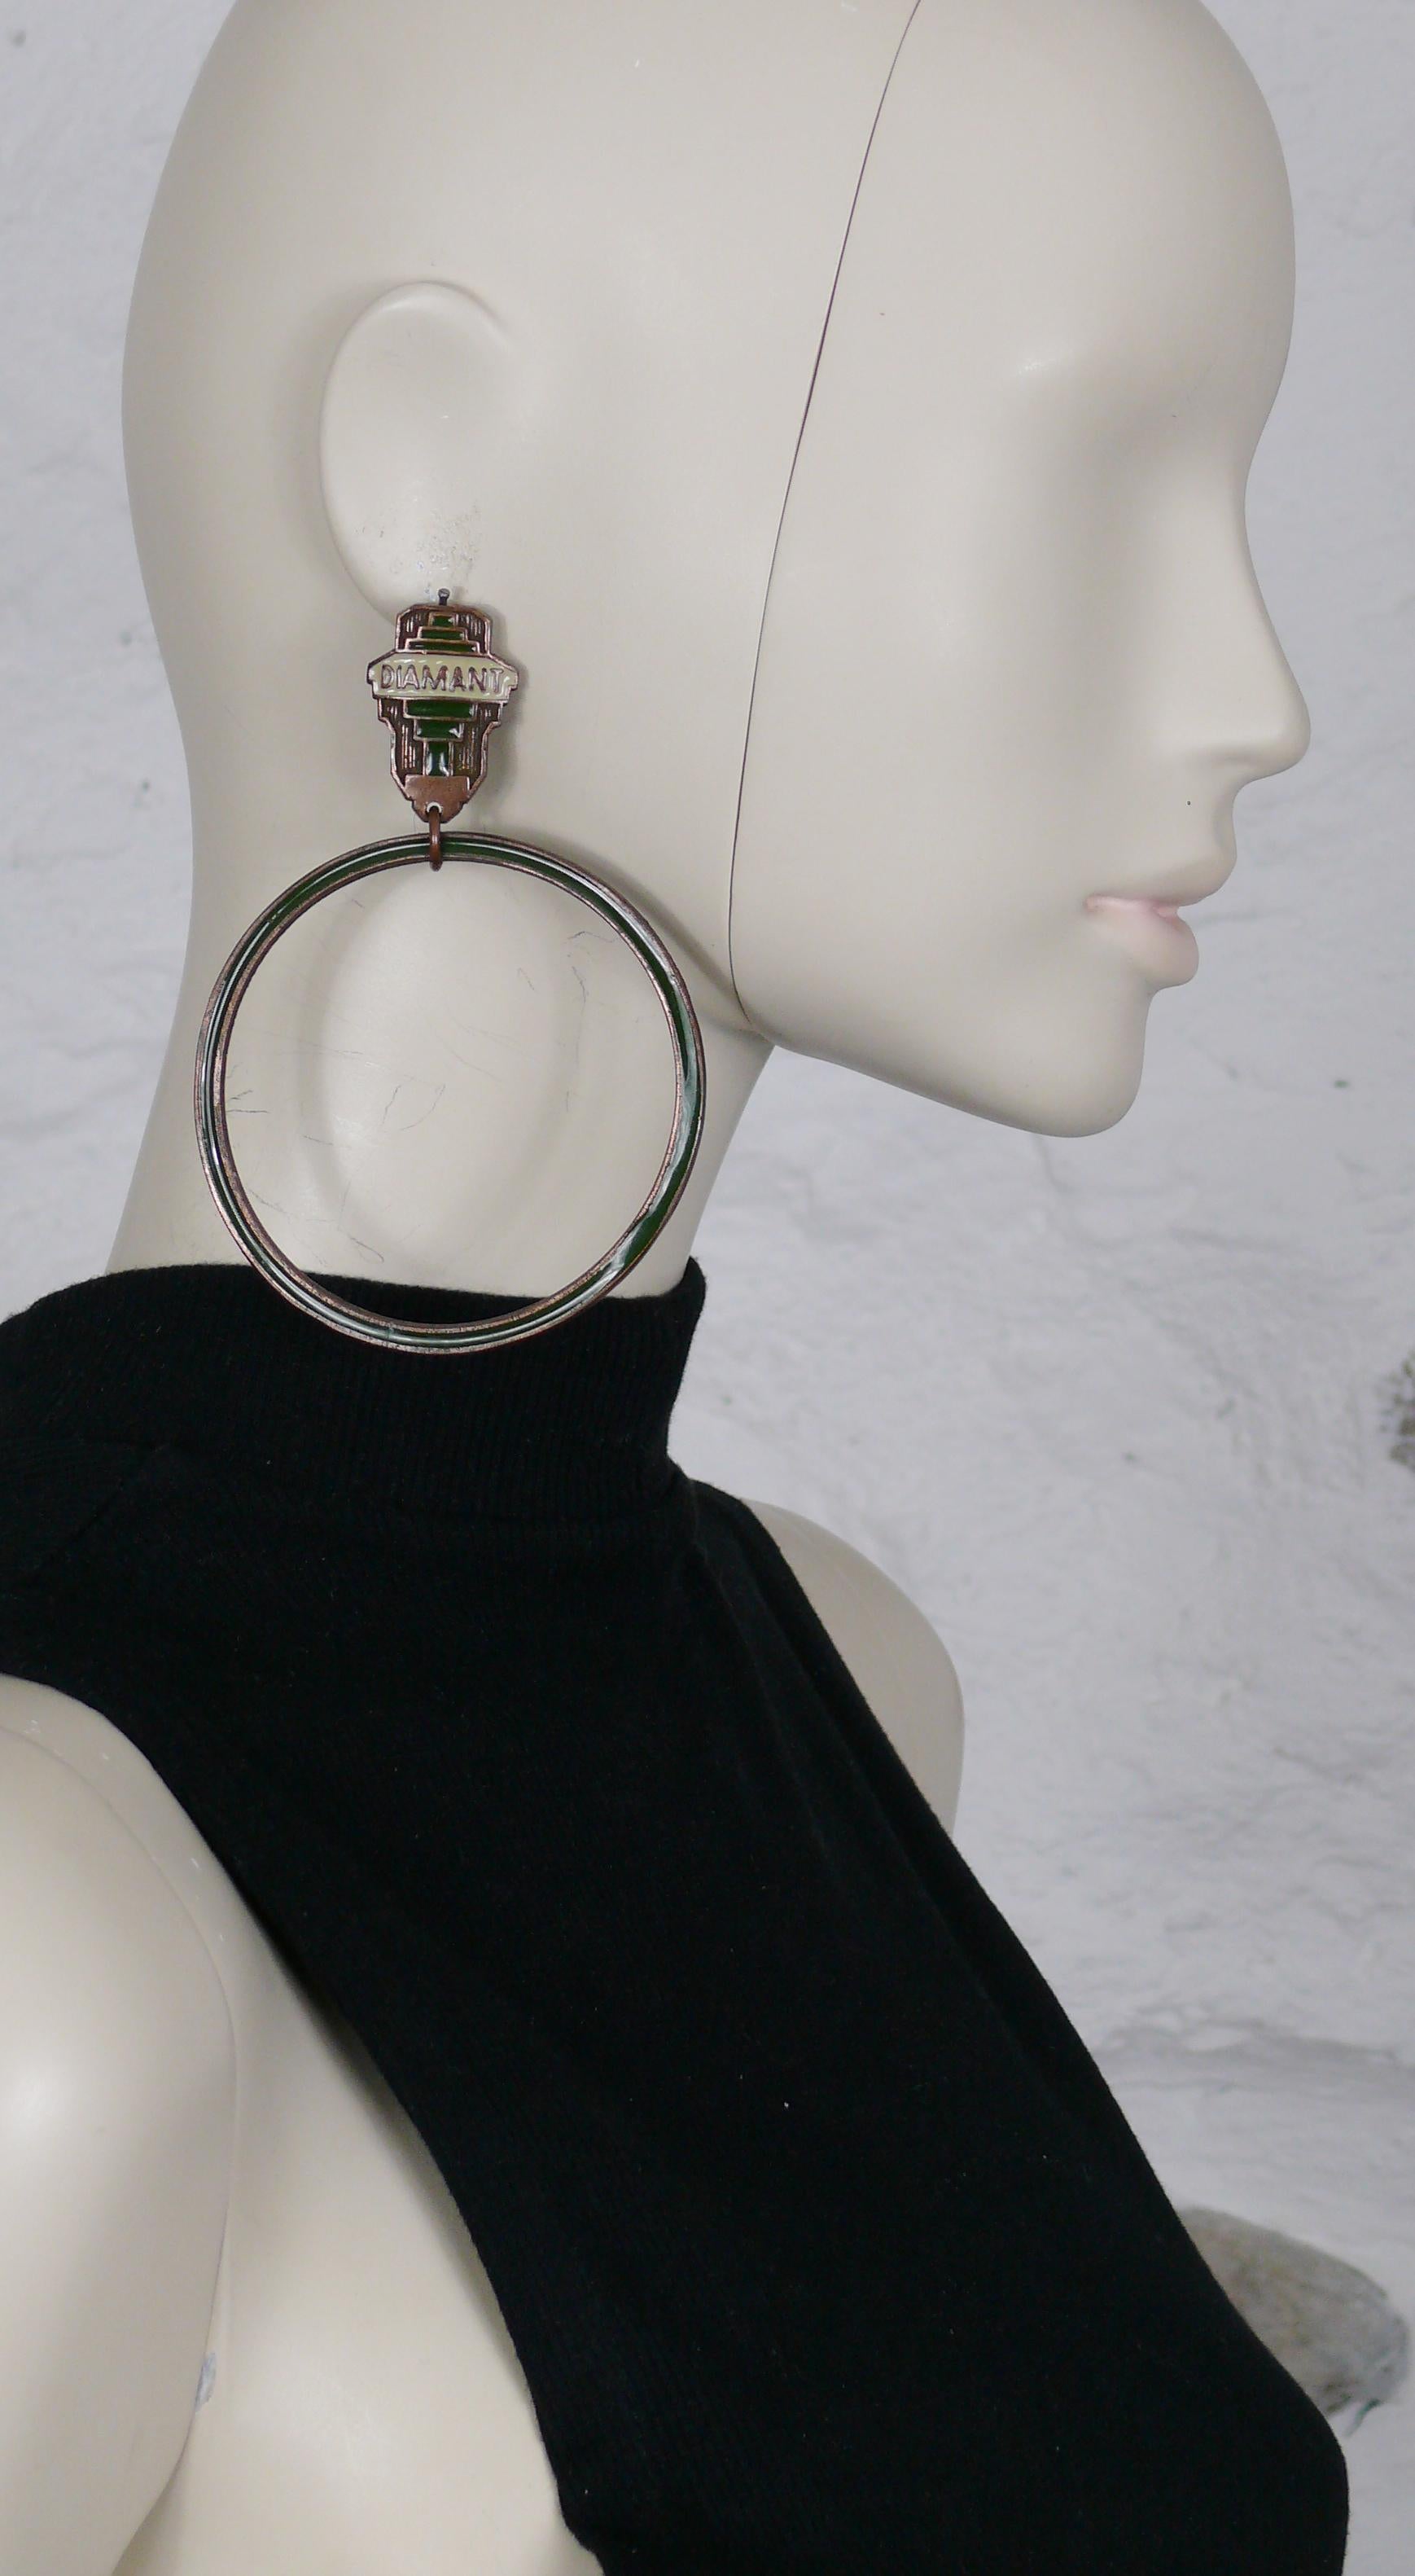 JEAN PAUL GAULTIER vintage Art Deco inspired oversized hoop earrings with DIAMANT inscription. Green and off-white enamel overlay on copper toned metal.

Embossed JPG.

Indicative measurements : height approx. 11 cm (4.33 inches) / hoop diameter